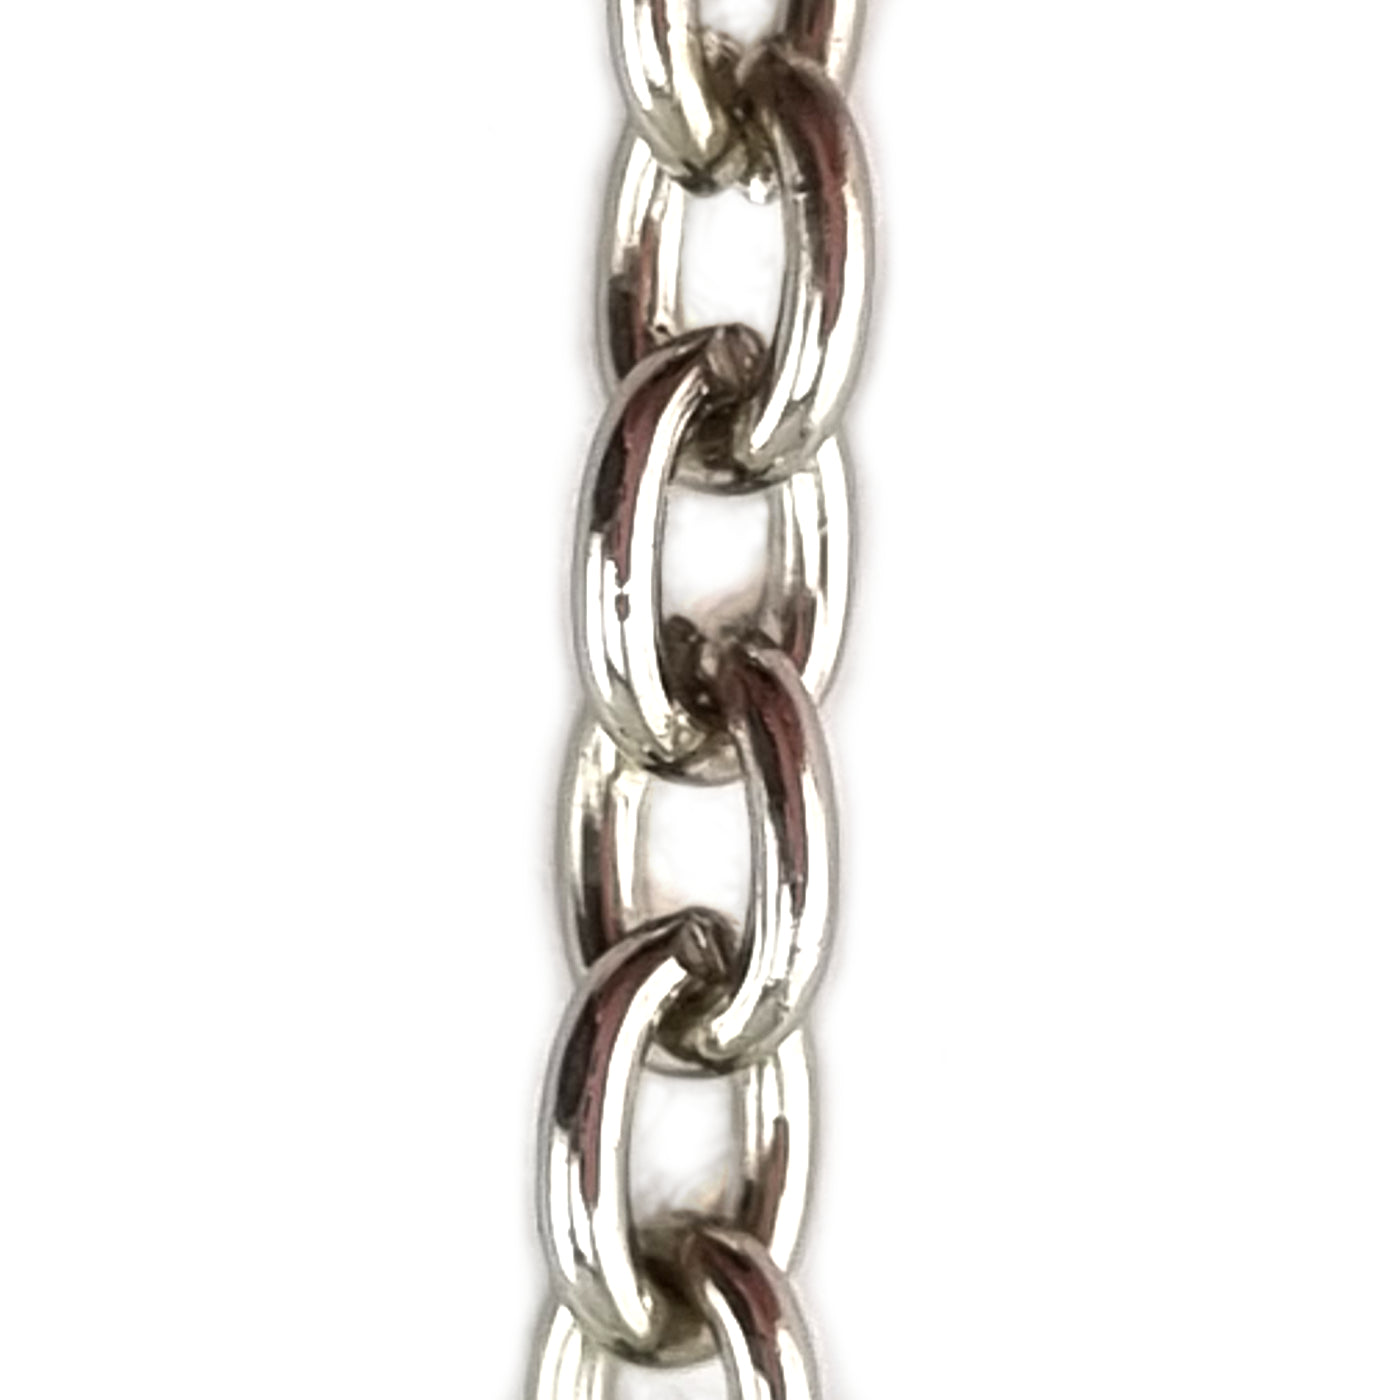 Nickel-plated trace jewellery chain, size 0.17mm, quantity 25m. Australia wide shipping. Shop online chain.com.au